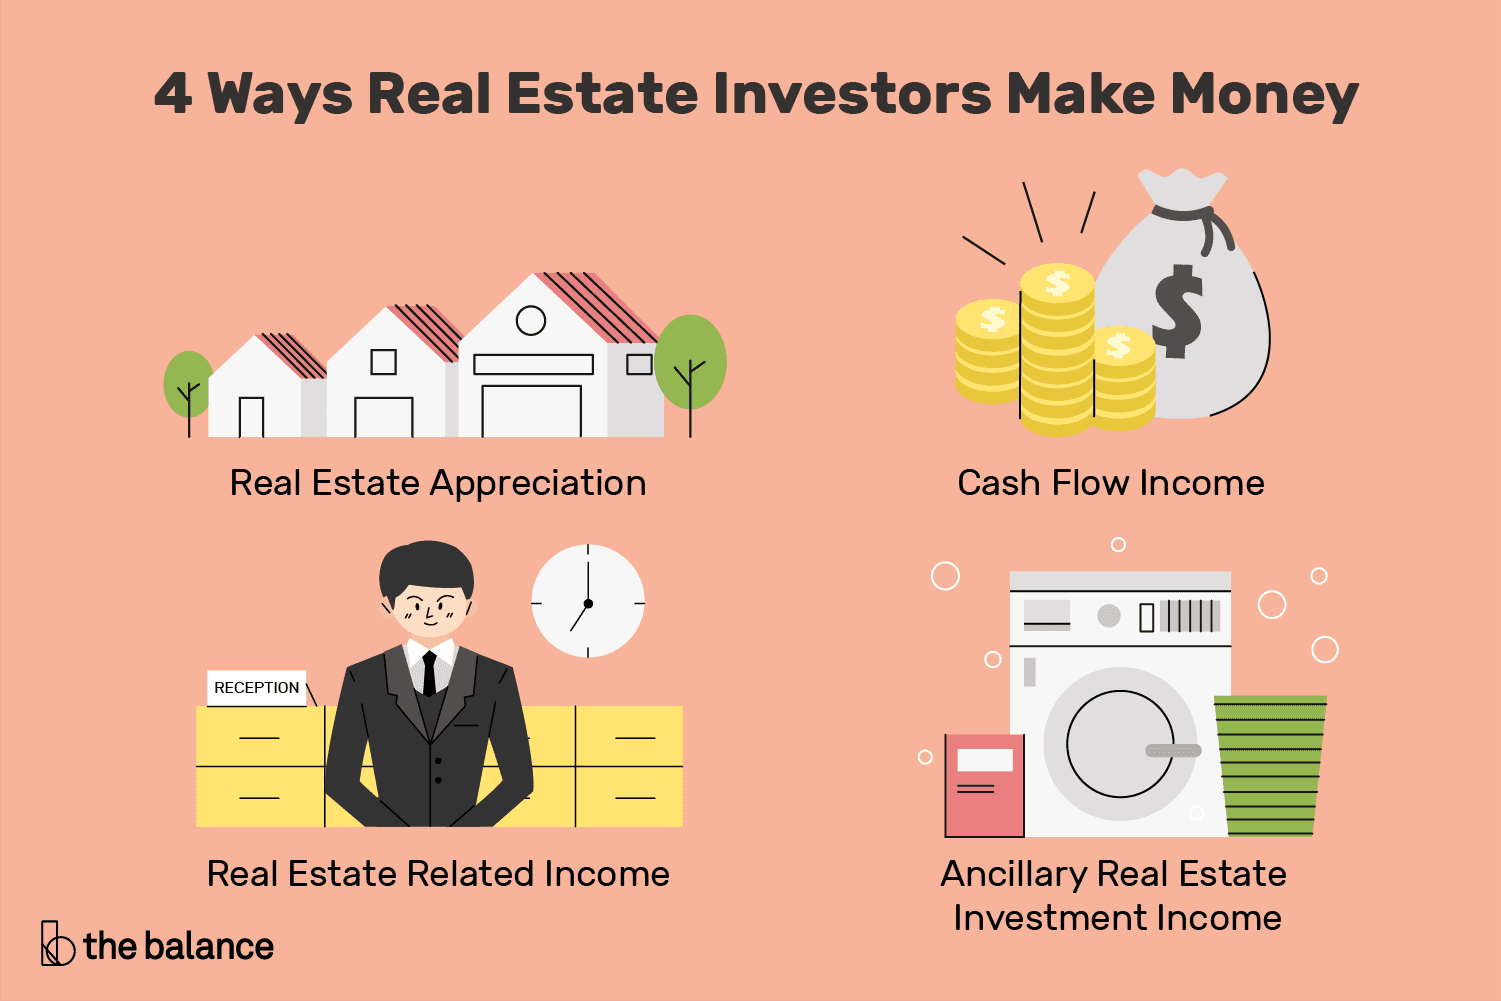 how much do real estate agebts make